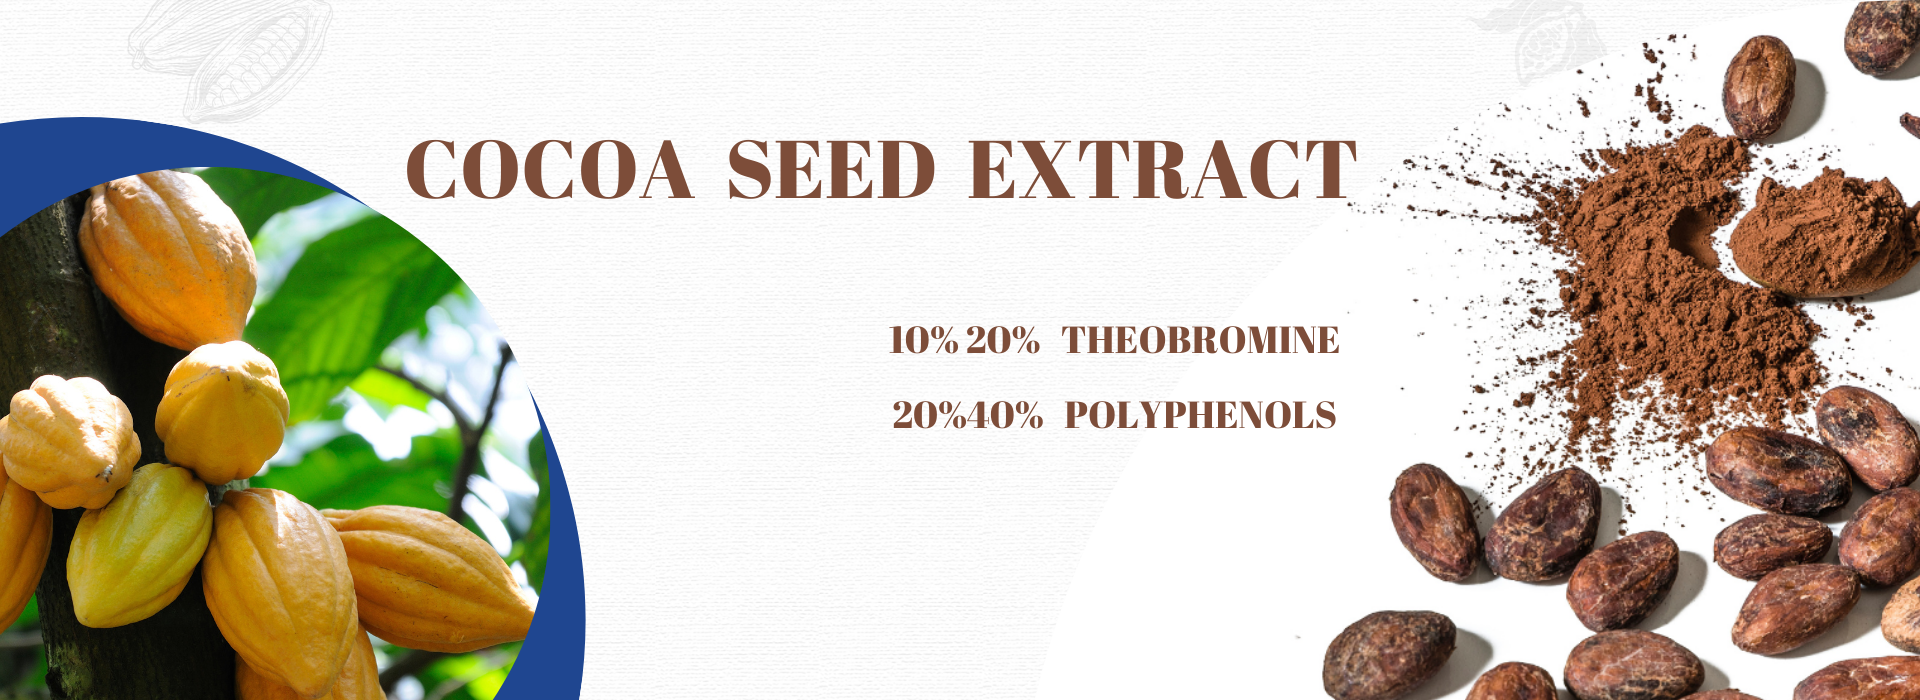 Cocoa seed extract